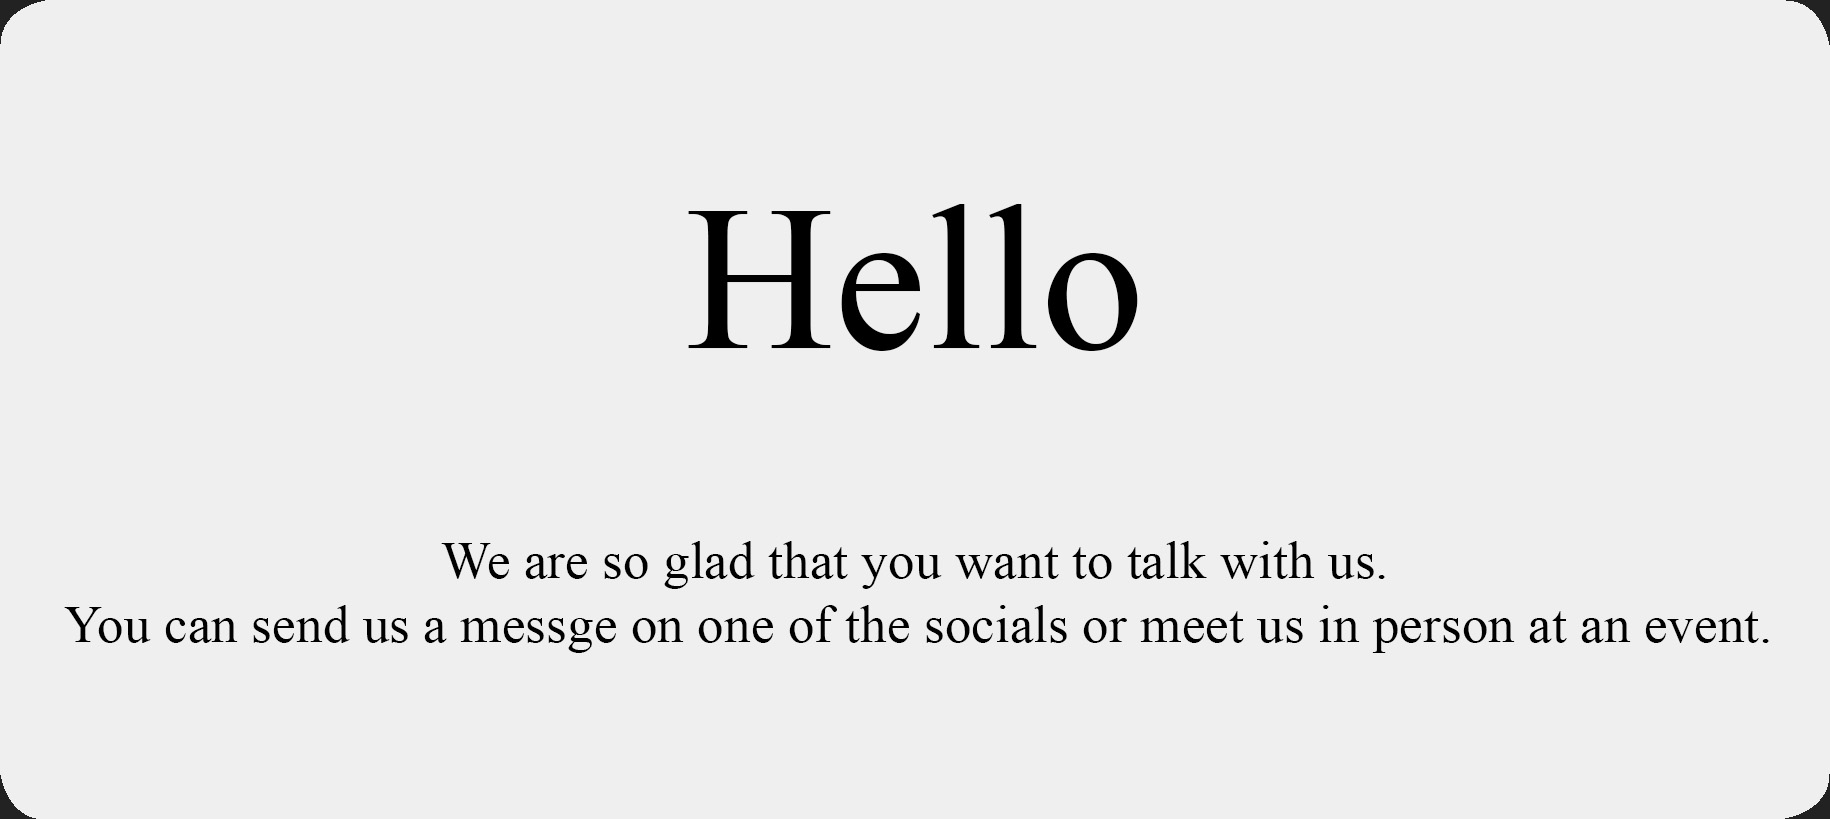 We are so glad that you want to talk with us.
	You can send us a messge on one of the socials or meet us in person at an event.